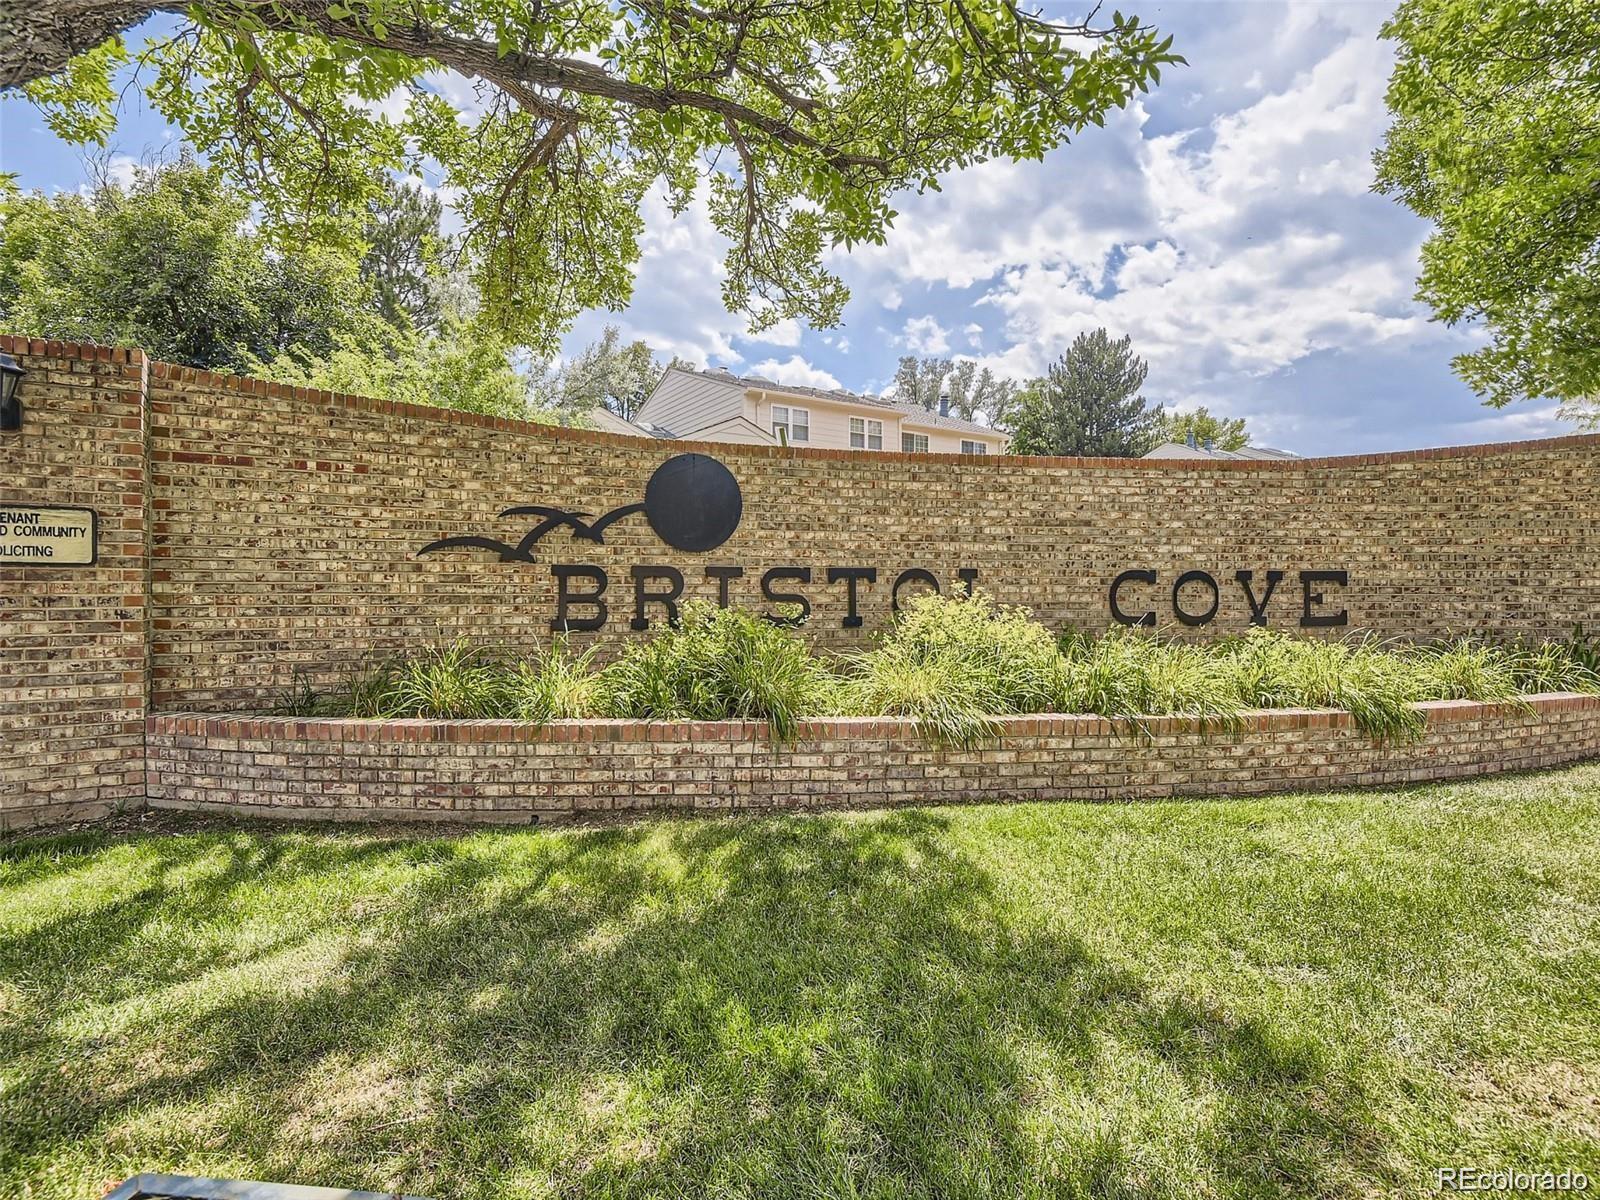 7694 s cove circle, centennial sold home. Closed on 2024-05-10 for $510,000.